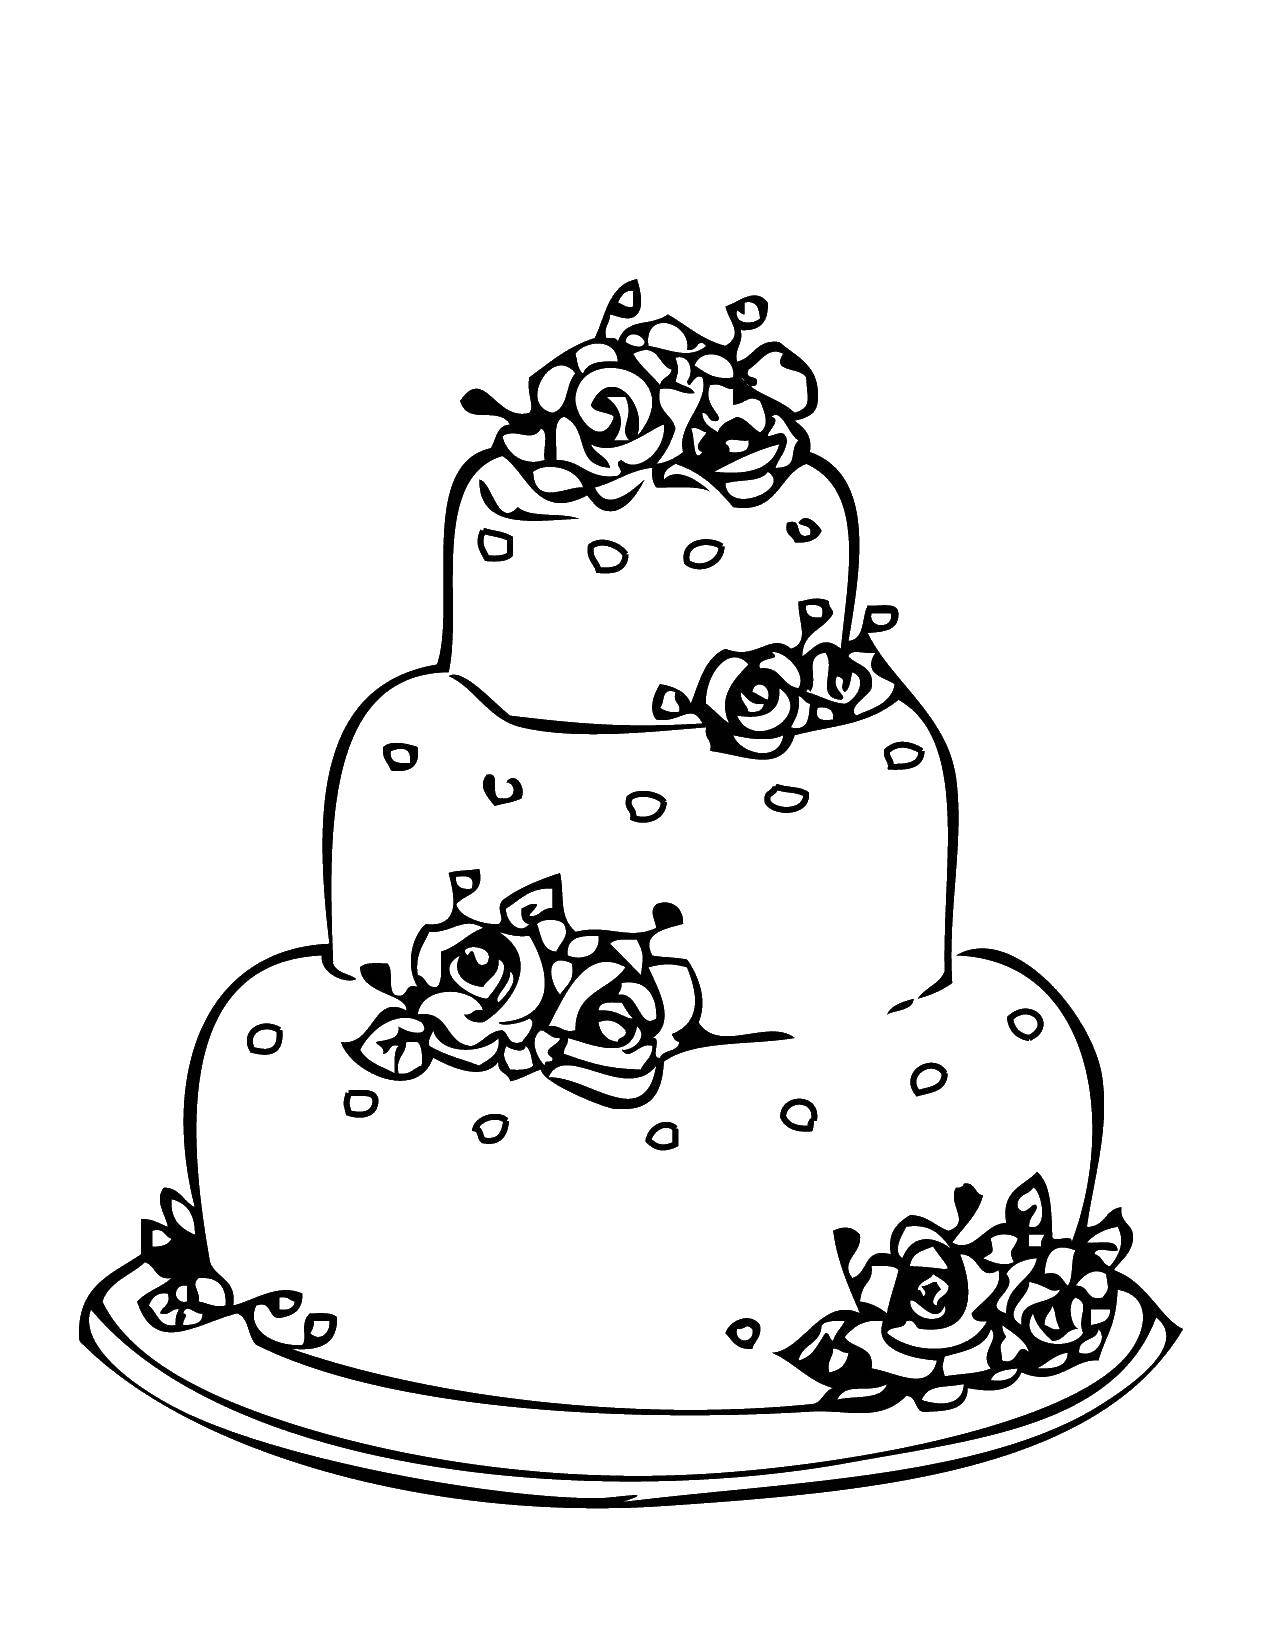 Coloring Cake with roses. Category cakes. Tags:  cakes, sweets, roses, cream.